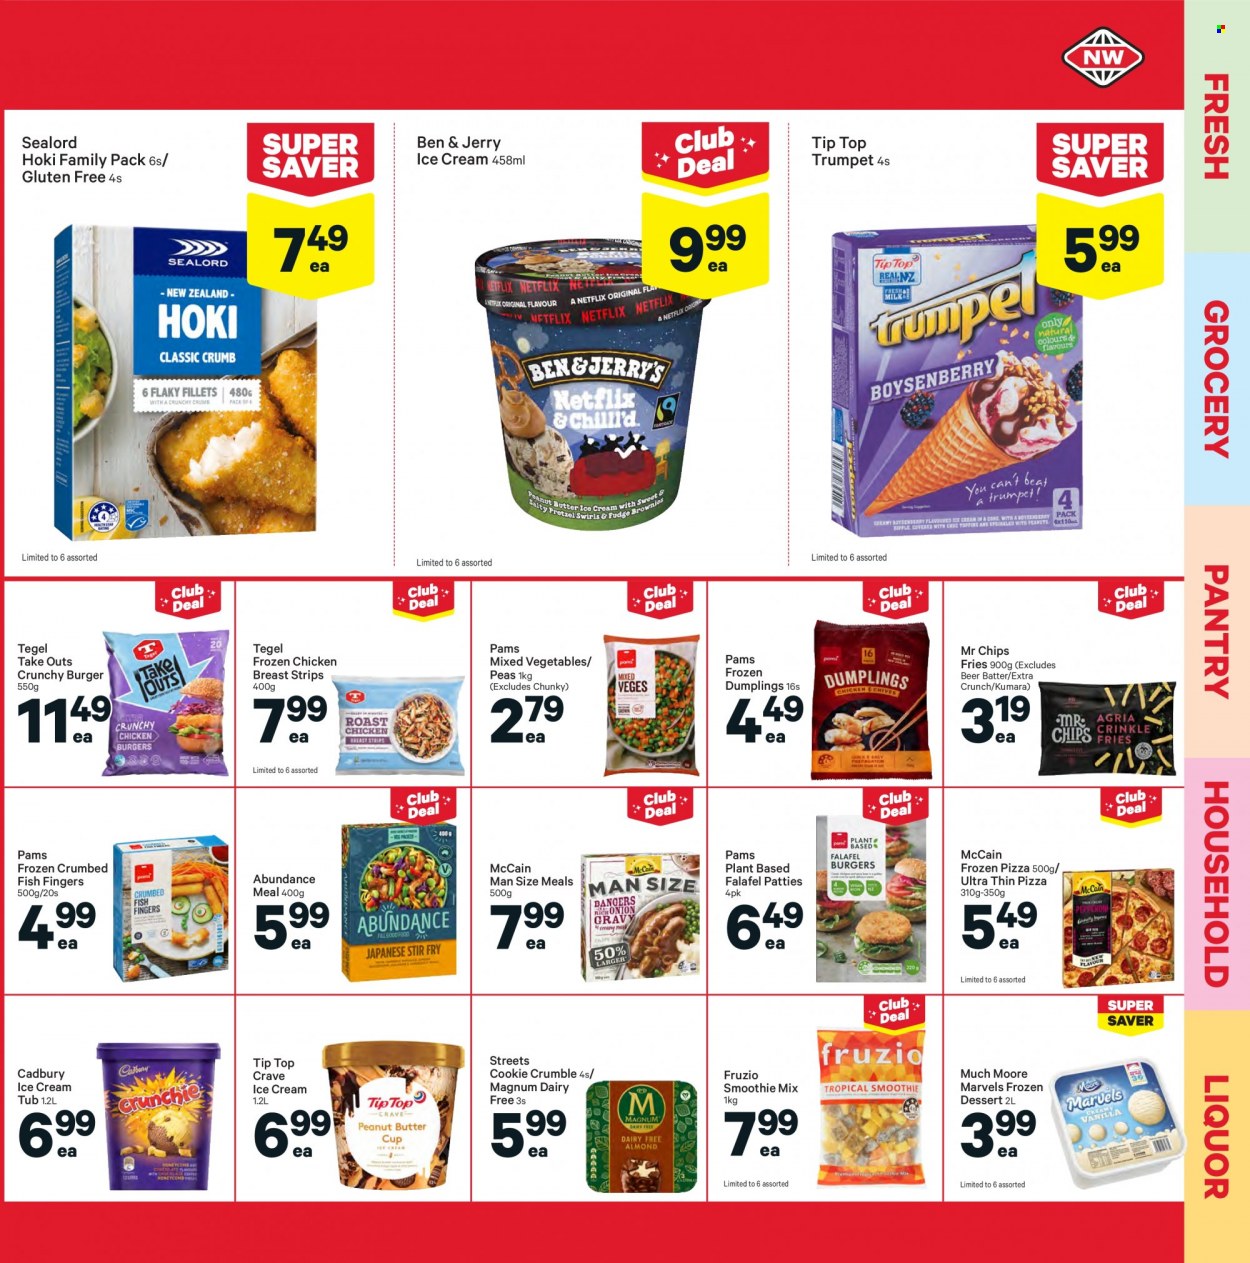 thumbnail - New World mailer - 20.09.2021 - 26.09.2021 - Sales products - Tip Top, peas, fish, crumbed fish, Sealord, hoki fish, fish fingers, fish sticks, pizza, hamburger, dumplings, Magnum, ice cream, Much Moore, mixed vegetables, strips, McCain, potato fries, Cadbury, smoothie, liquor, beer. Page 13.